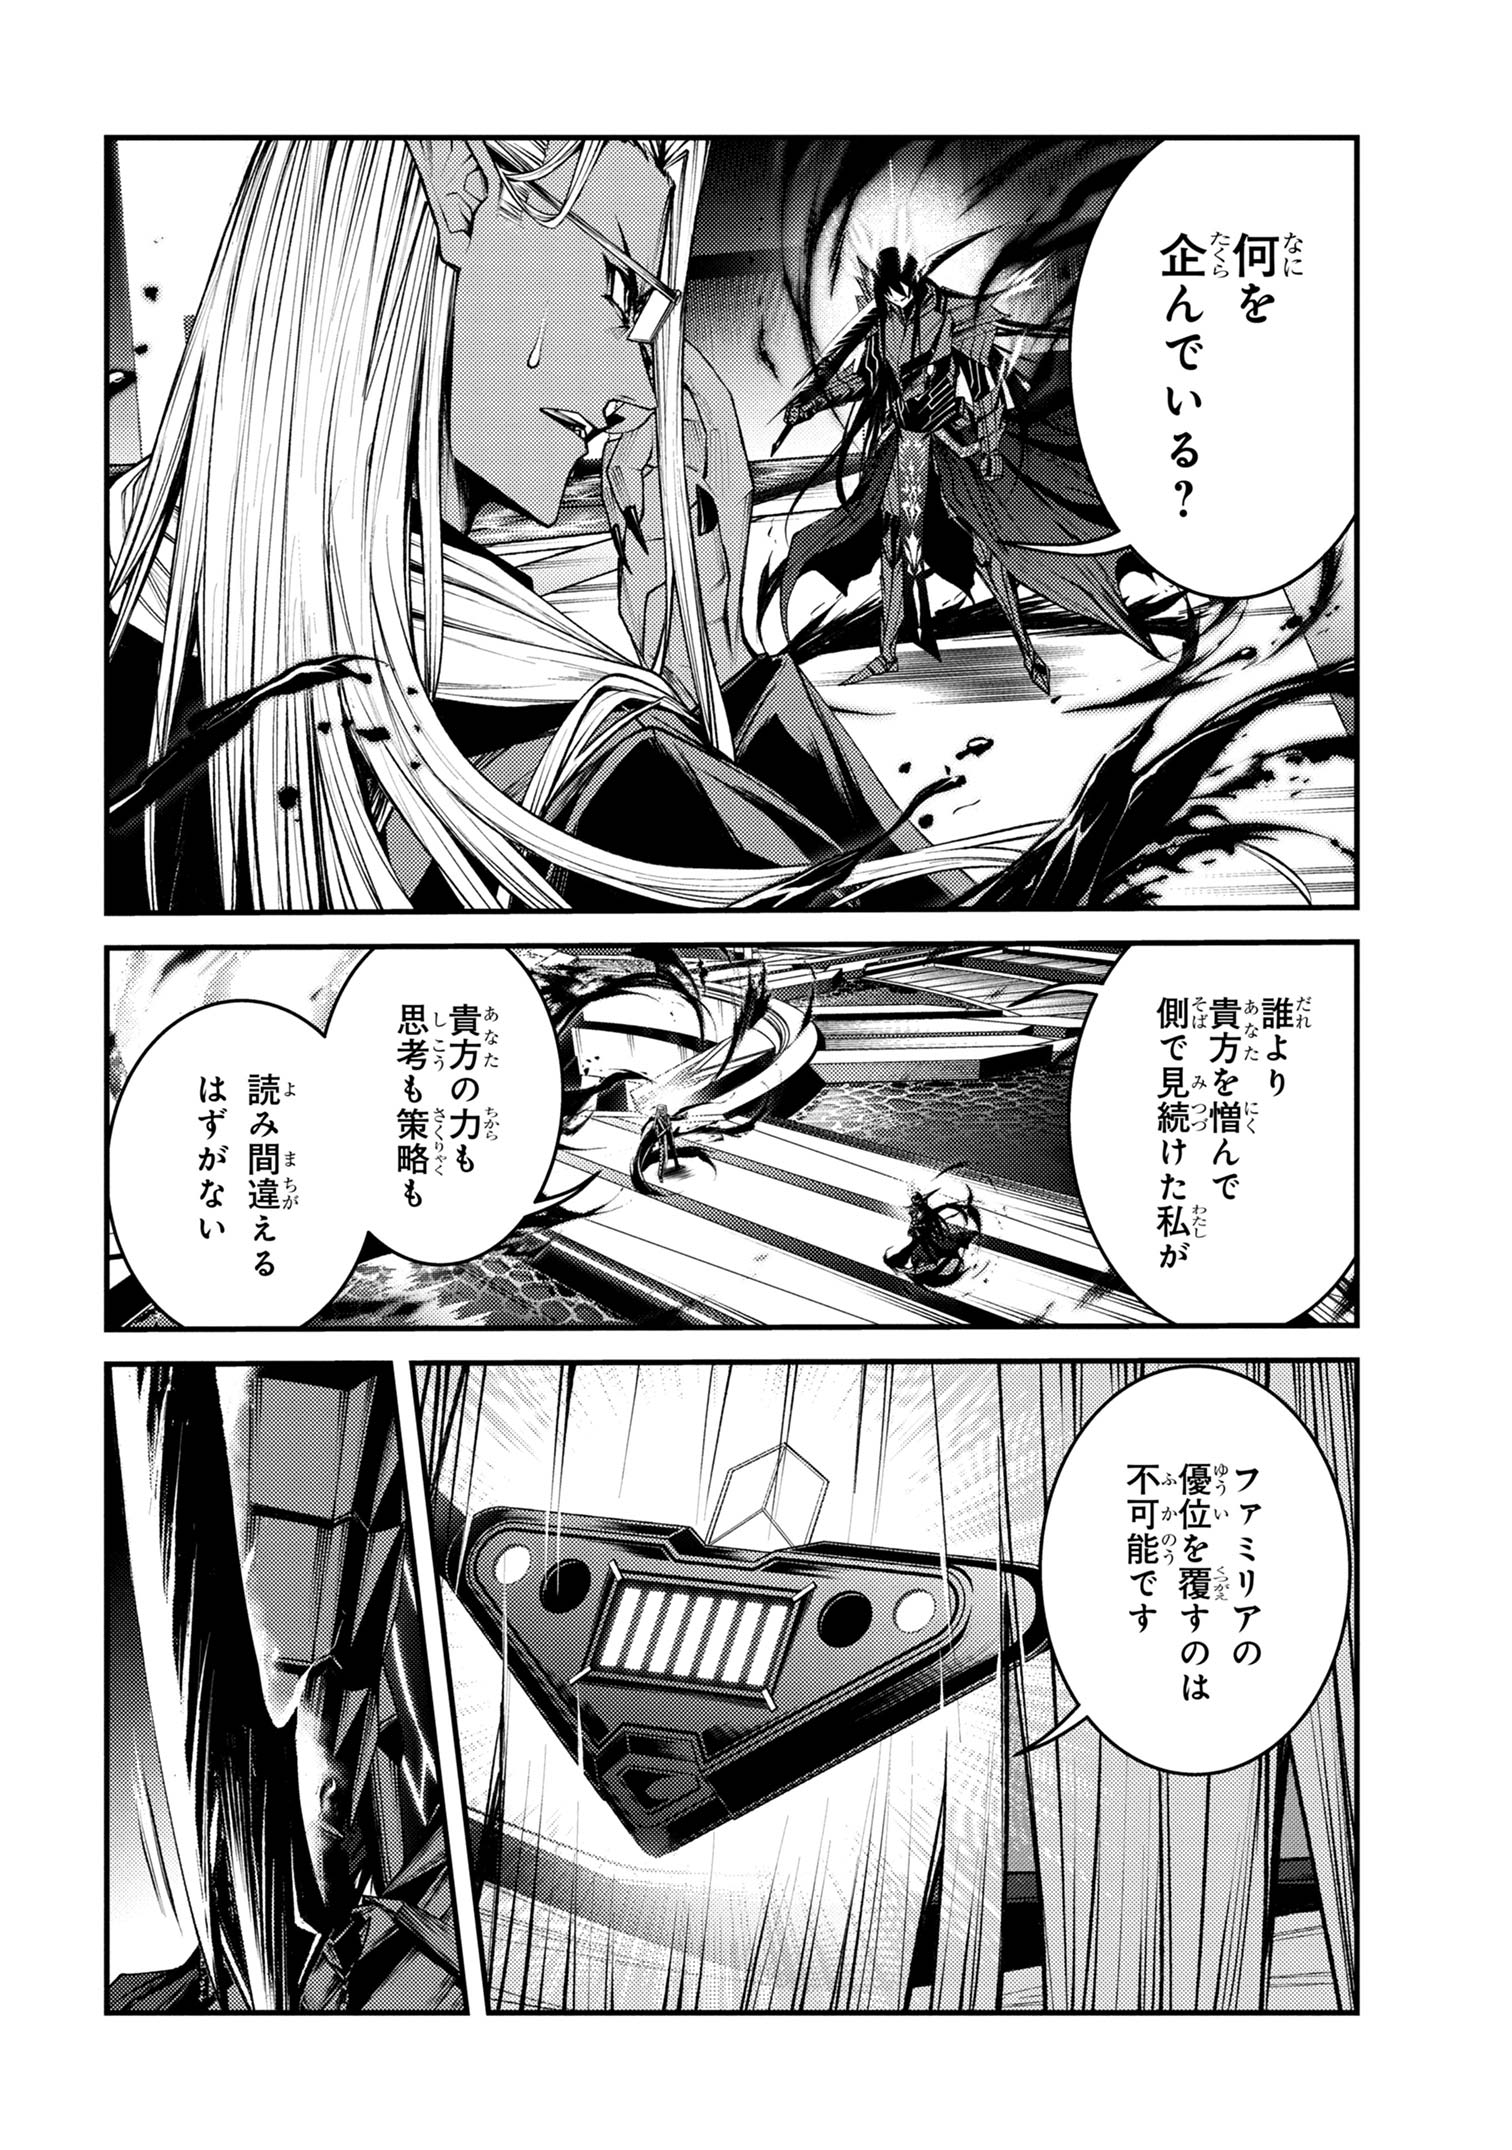 Maou 2099 - Chapter 11.2 - Page 2